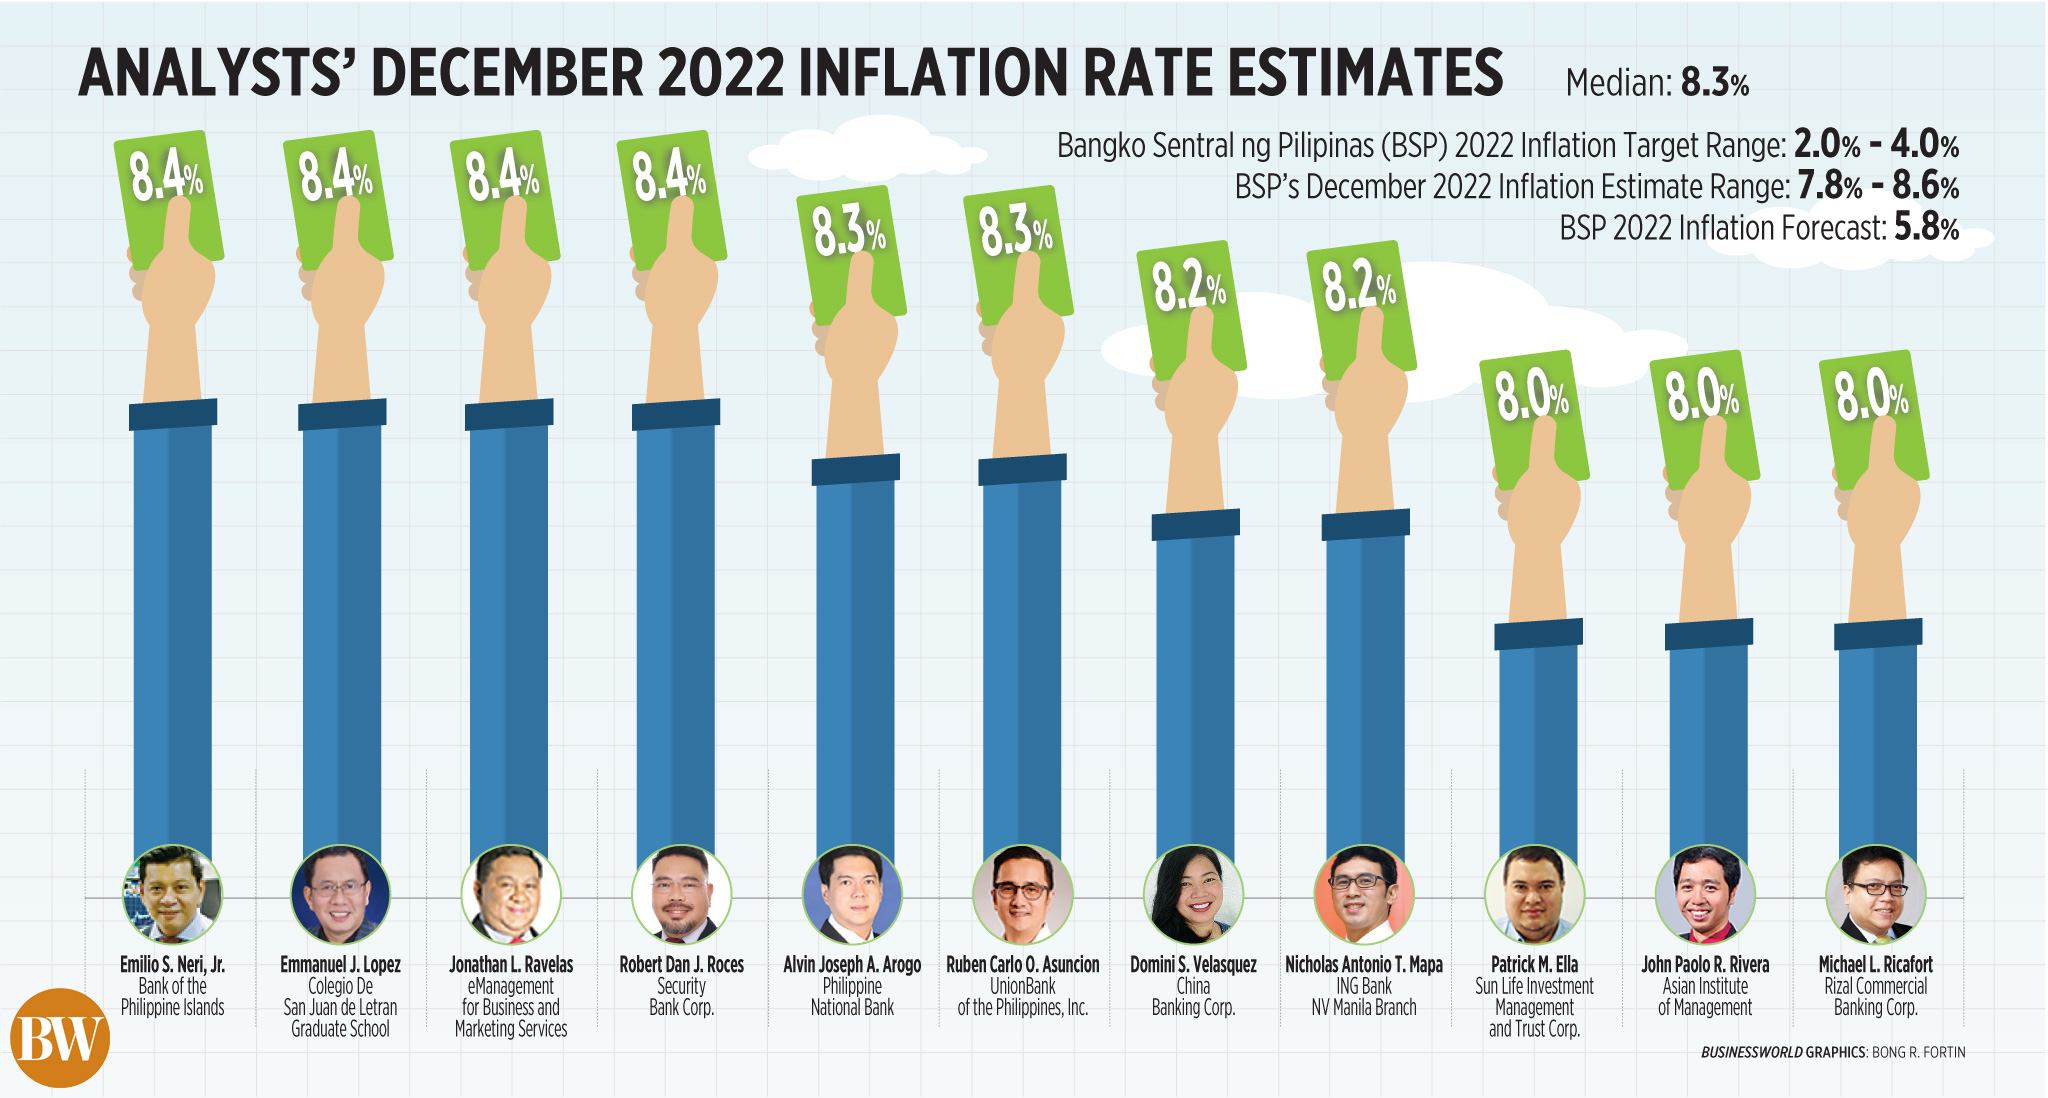 Analysts’ December 2022 inflation rate estimates